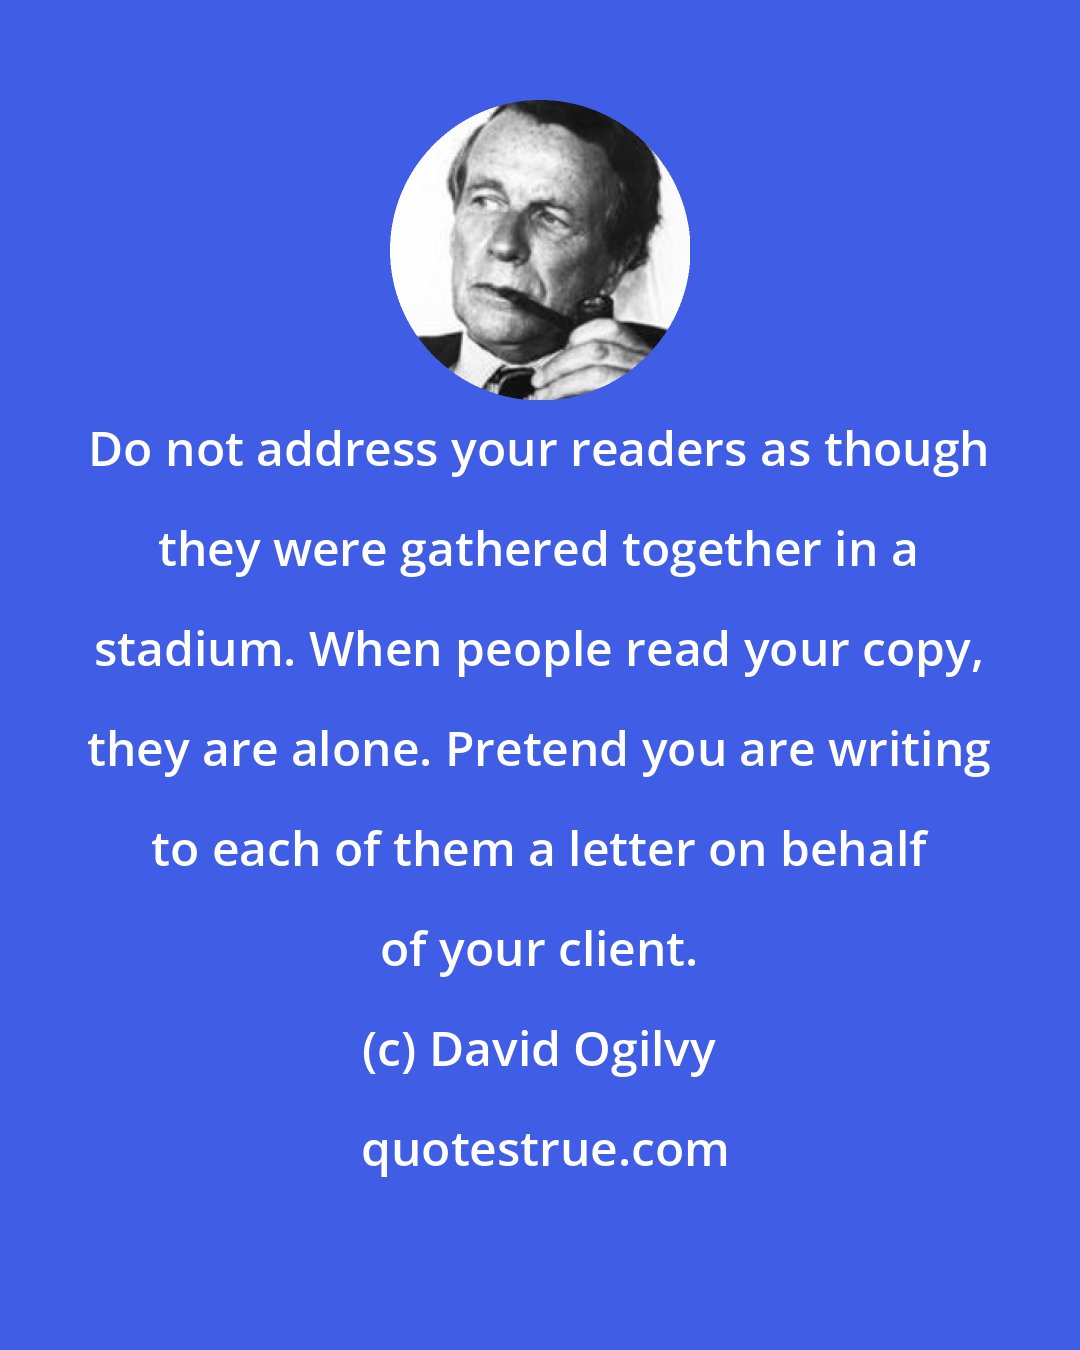 David Ogilvy: Do not address your readers as though they were gathered together in a stadium. When people read your copy, they are alone. Pretend you are writing to each of them a letter on behalf of your client.